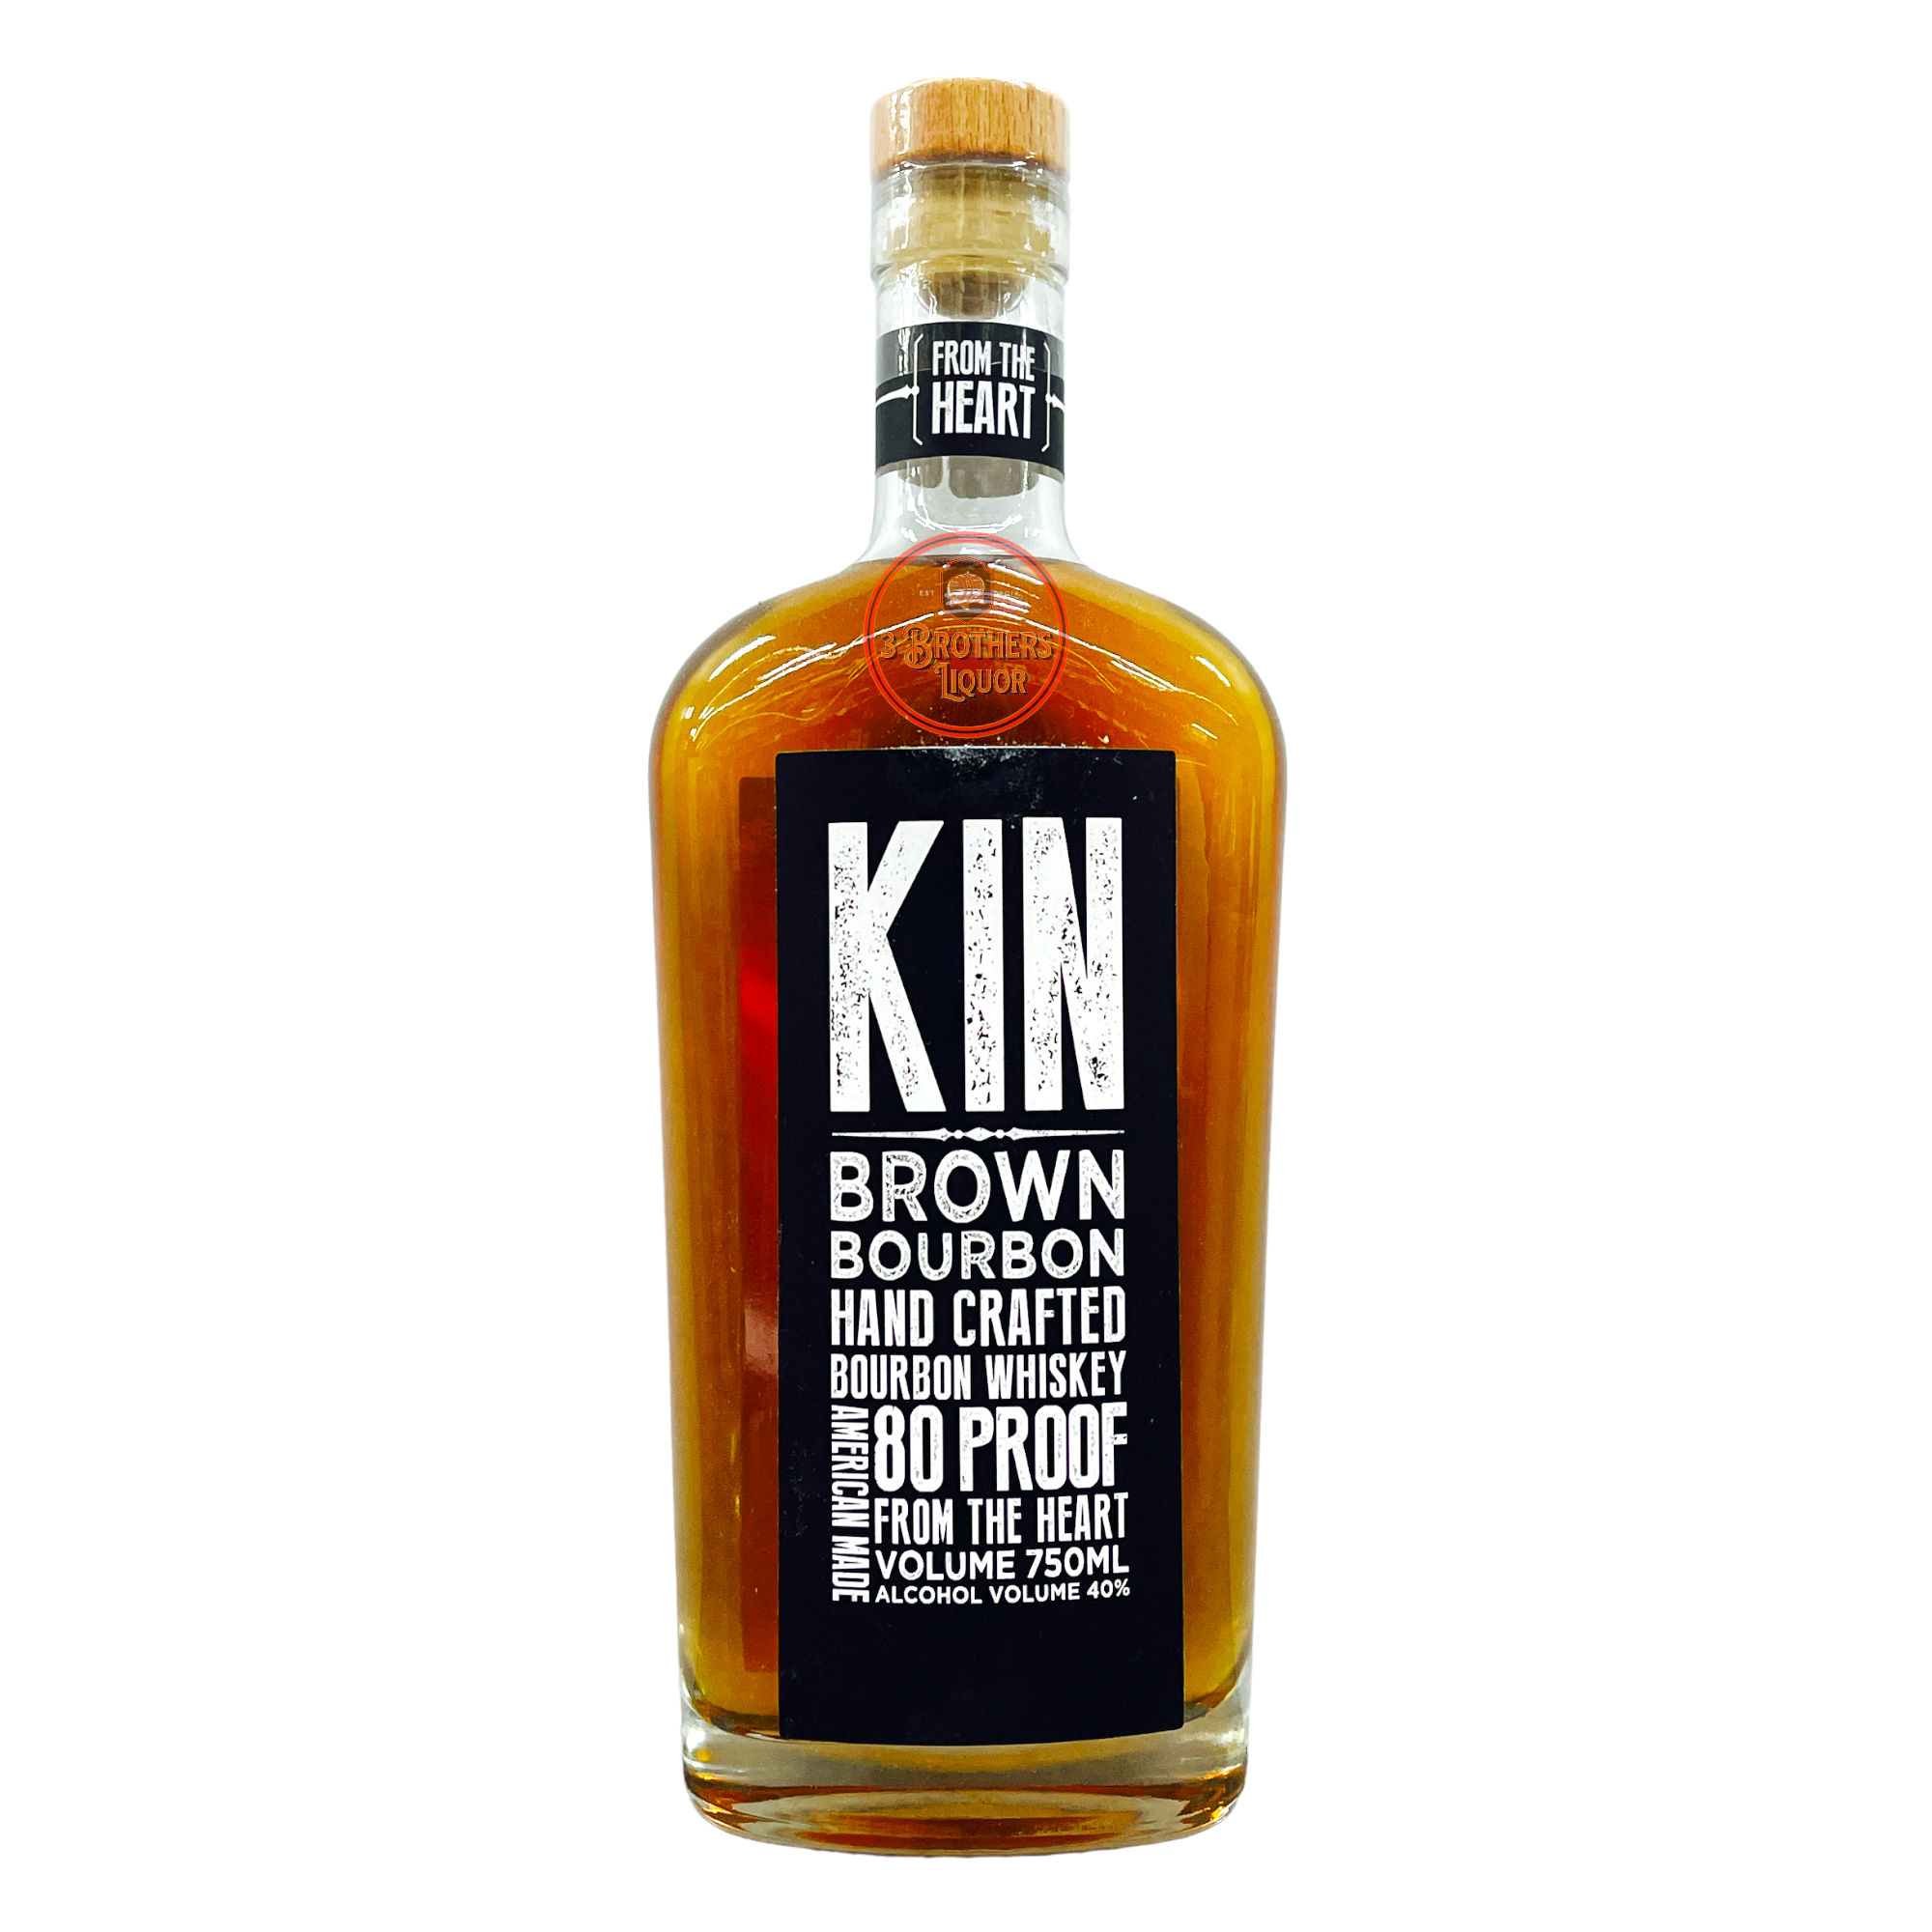 Kin Brown Bourbon Hand Crafted Bourbon Whiskey (80 Proof)